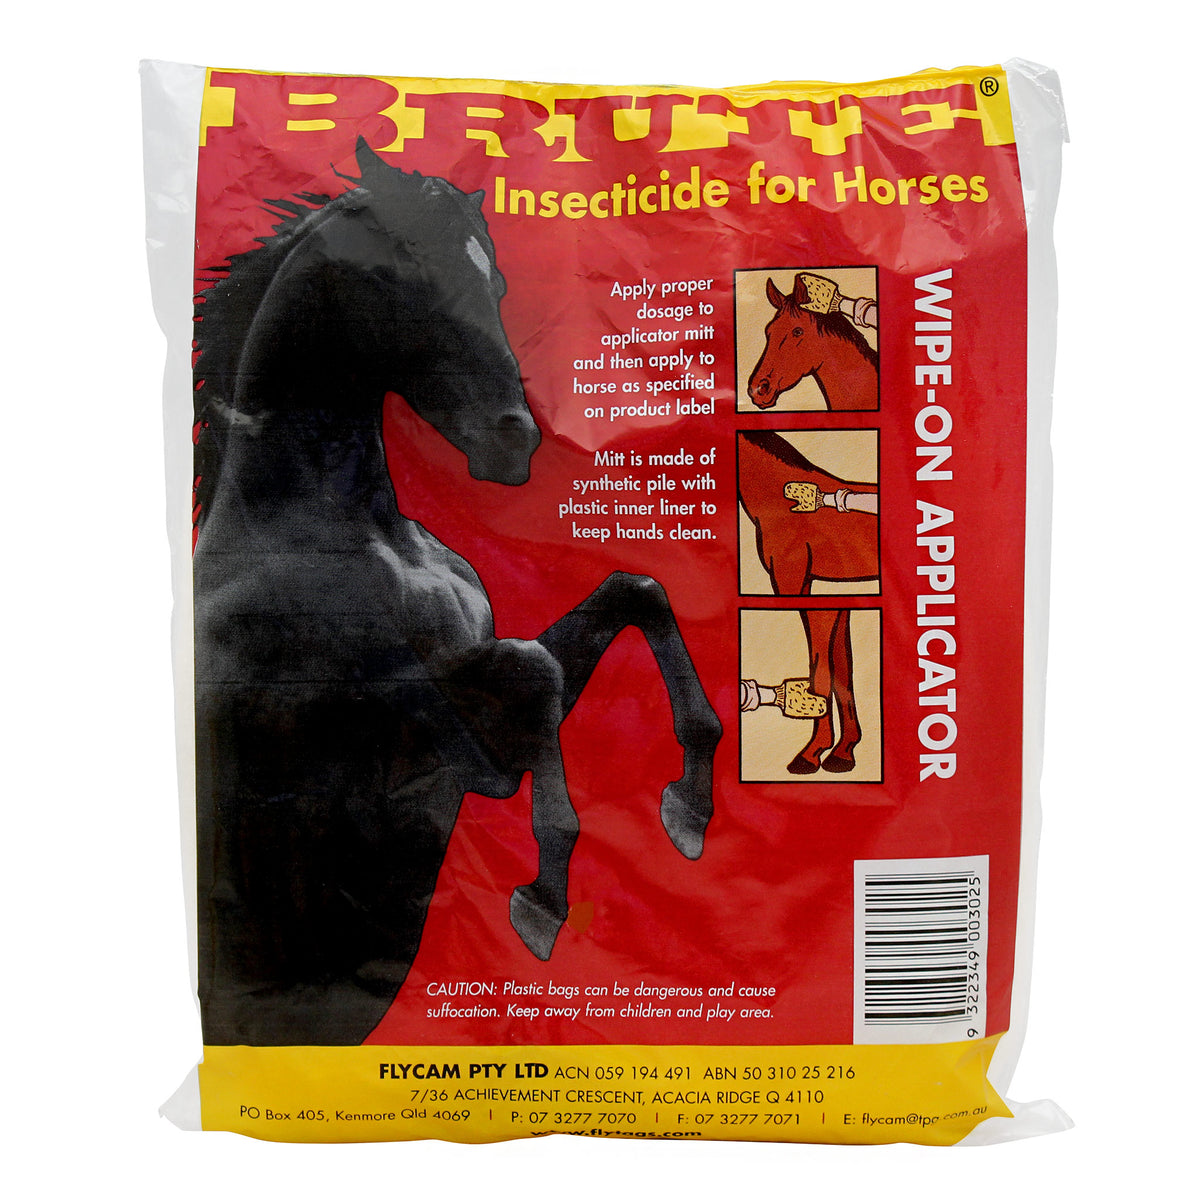 Brute Insecticide for Horses 500ml